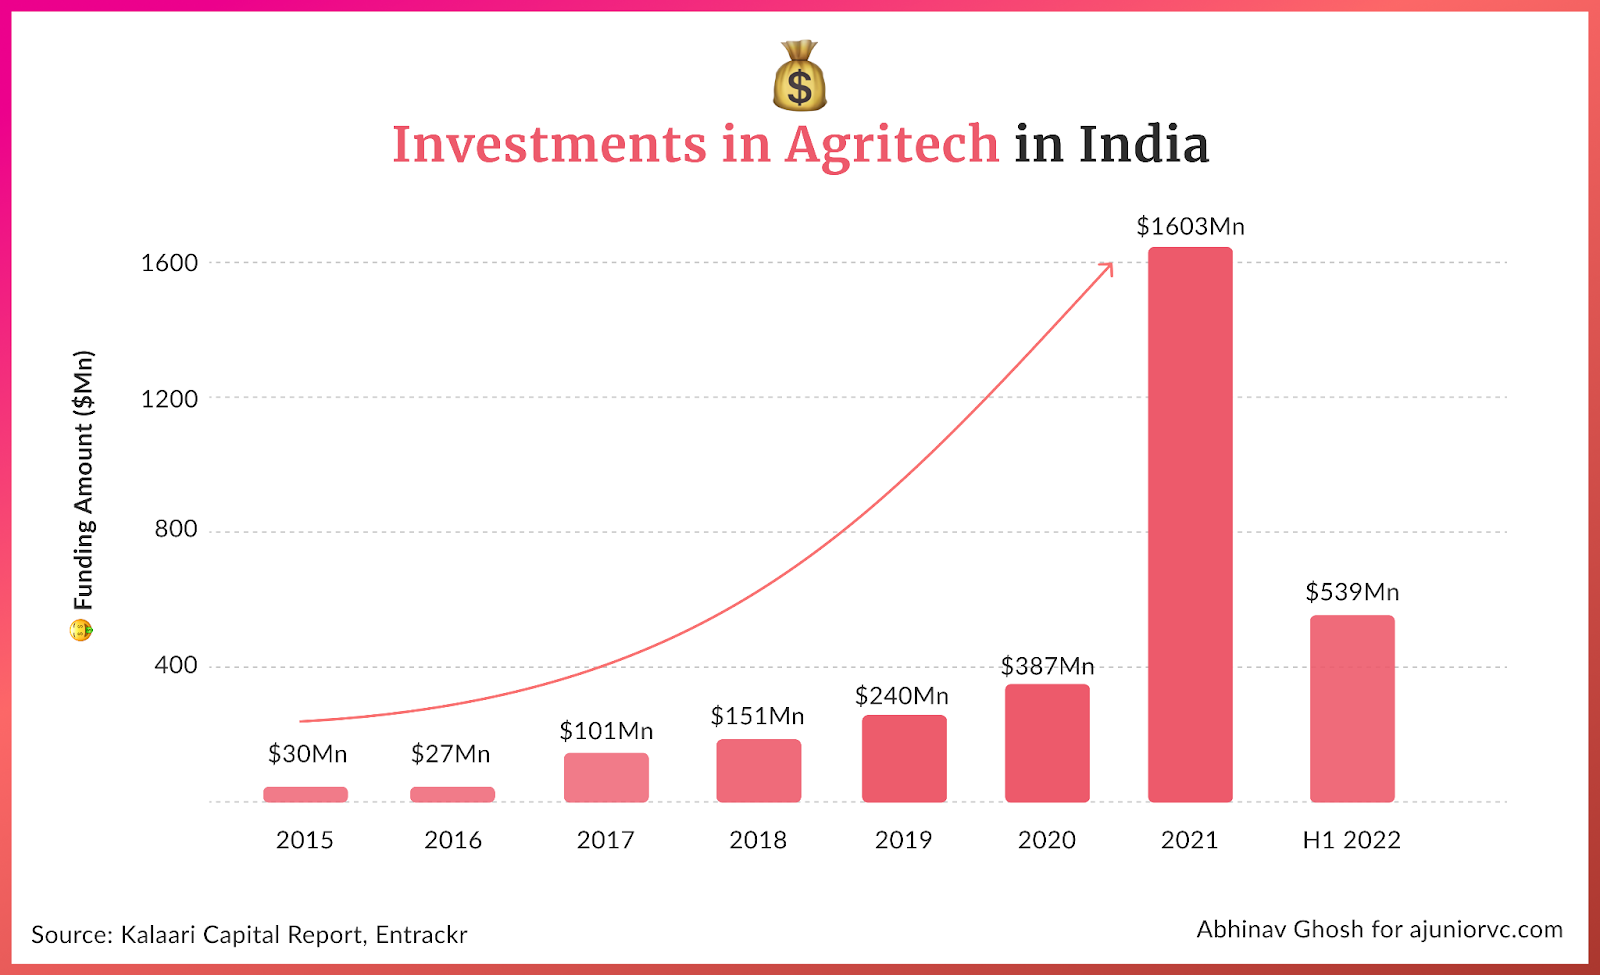 Agritech investments in India